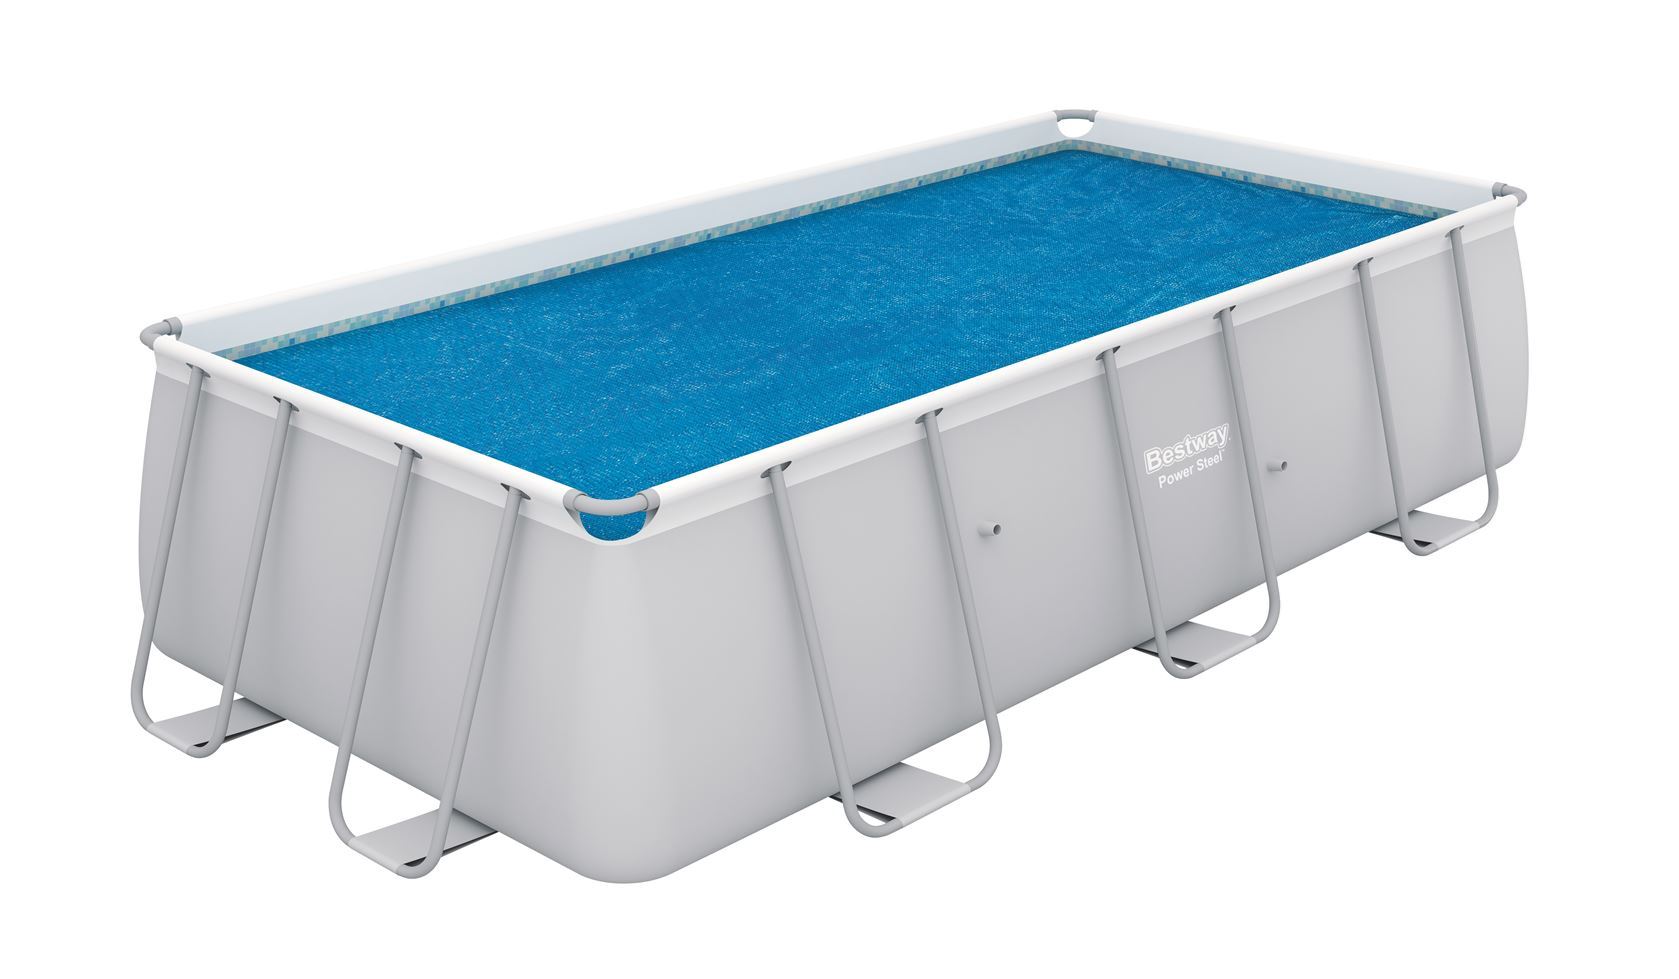 Bestway floating solar pool cover/cover - rectangular - L732 x W366 cm